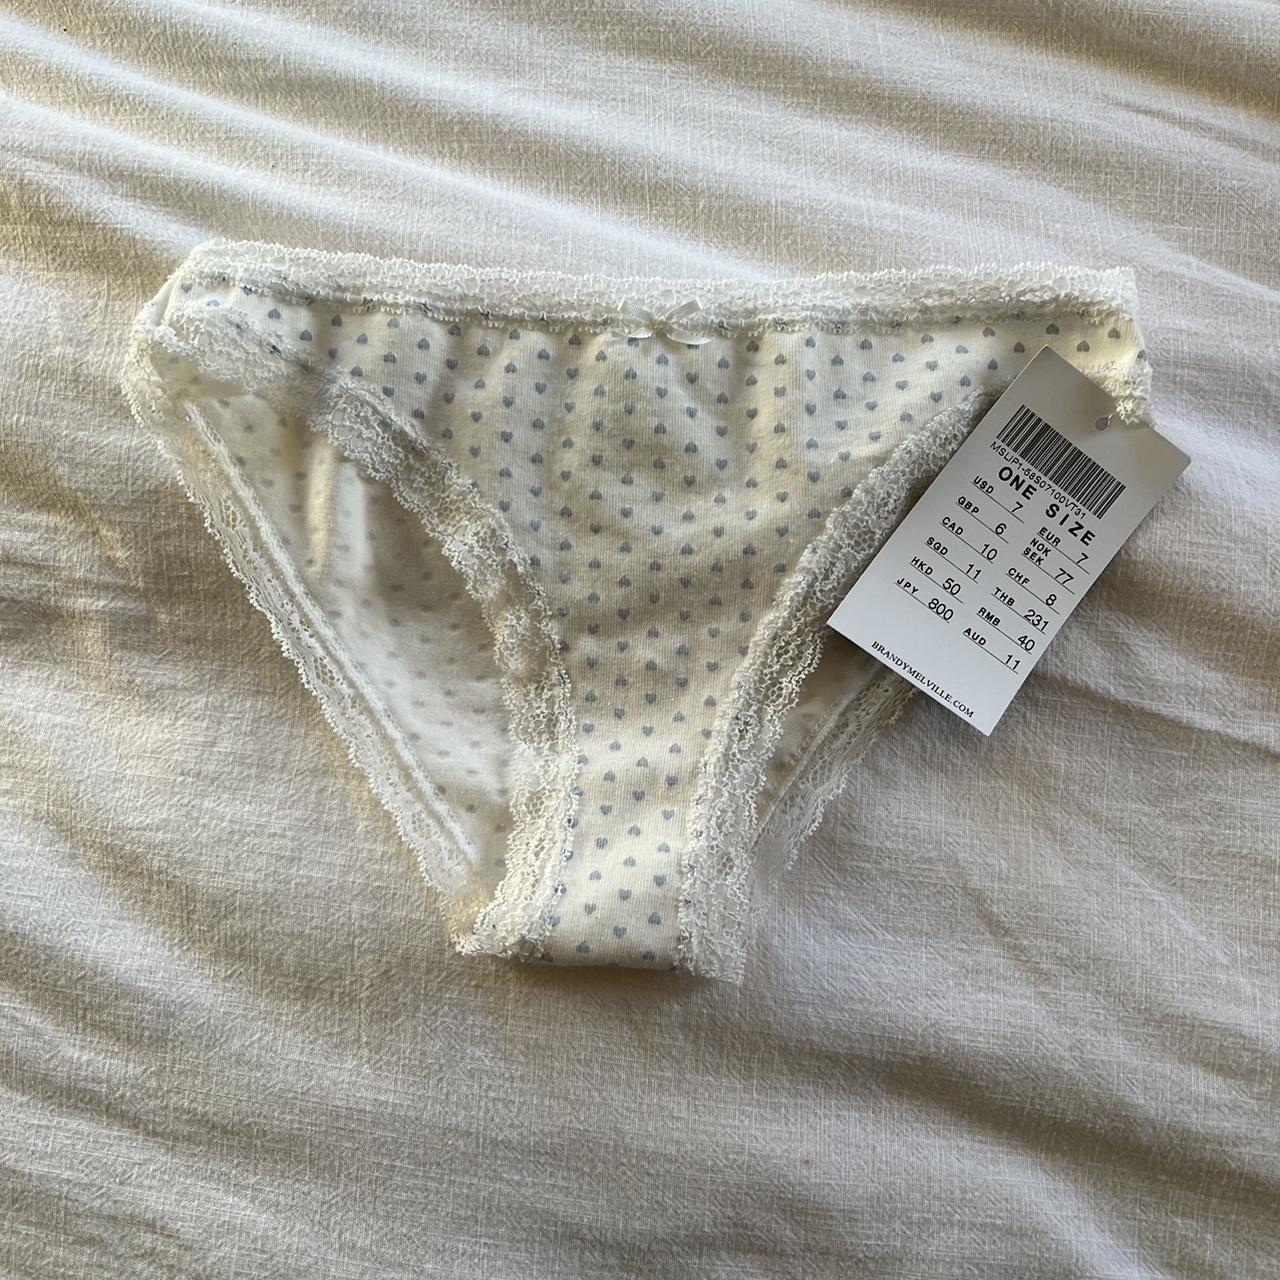 Intimates, Brandy Melville Womens Heart Lace Underwear White With Red  Hearts